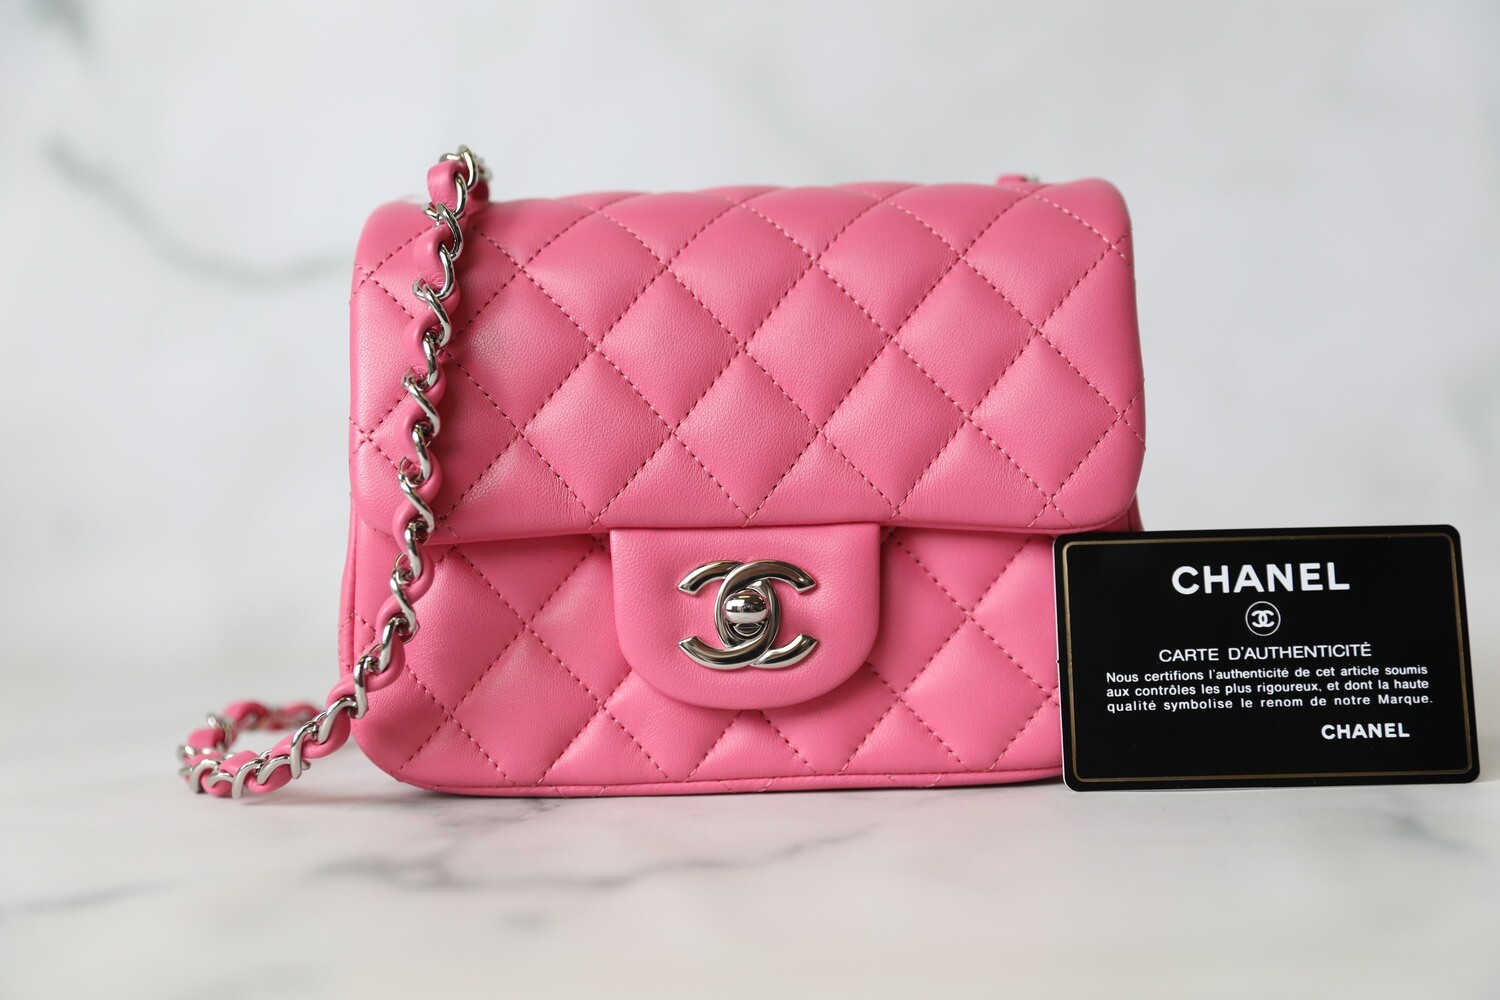 Chanel Camellia Flap Small, Pink Lambskin with Gold Hardware, New in Box  WA001